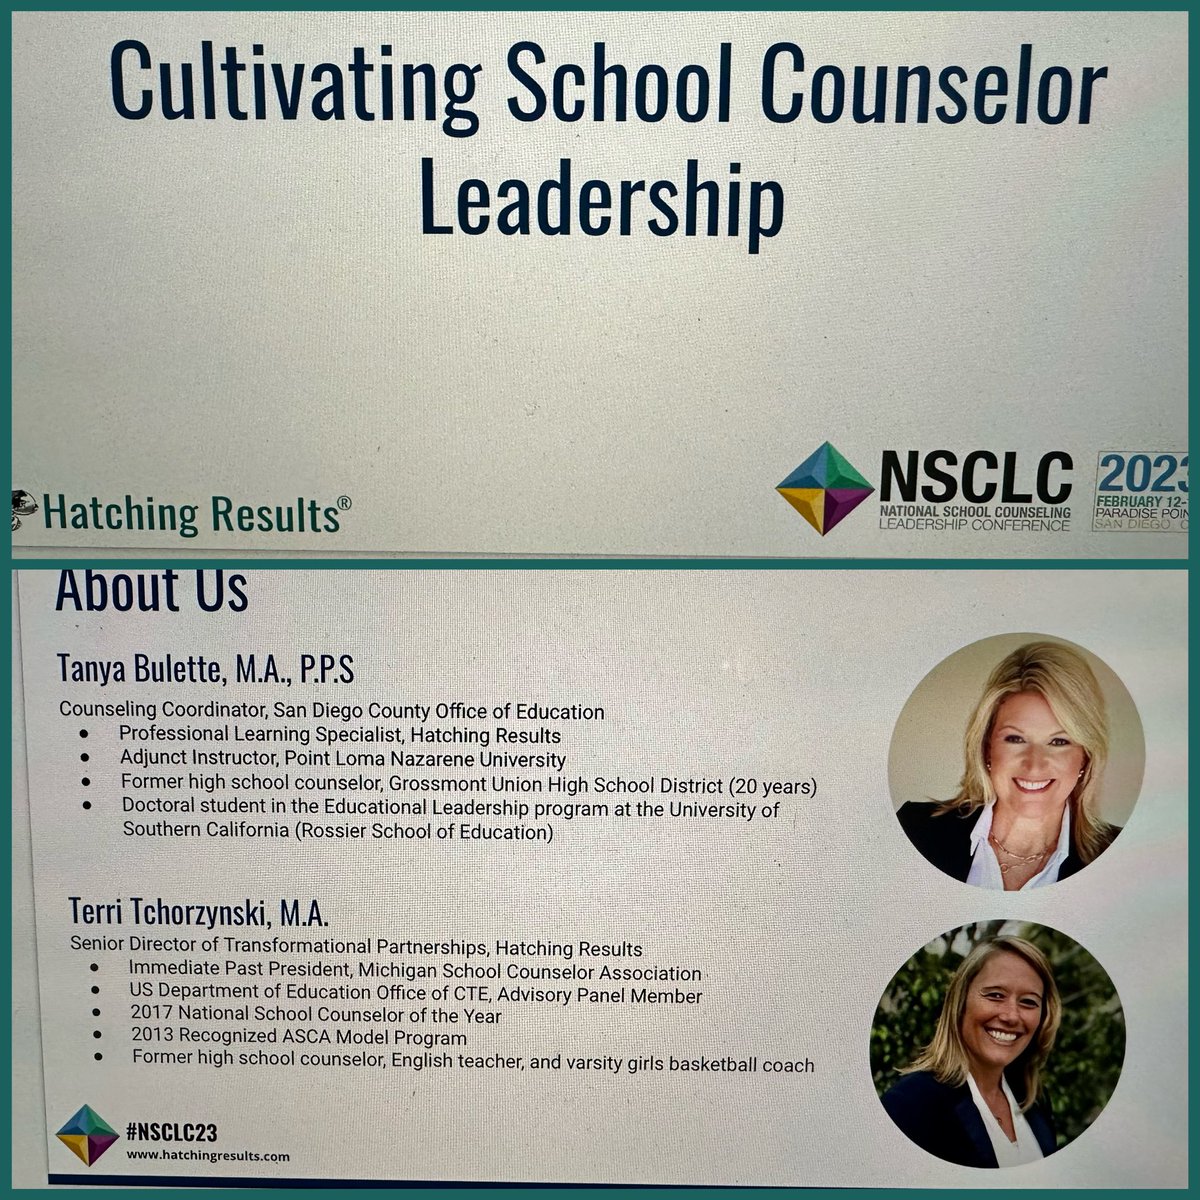 So excited to be at NSCLC and presenting in two sessions with Mindy Willard and Terri Tchorzynski! #nsclc23 #sdcounselors